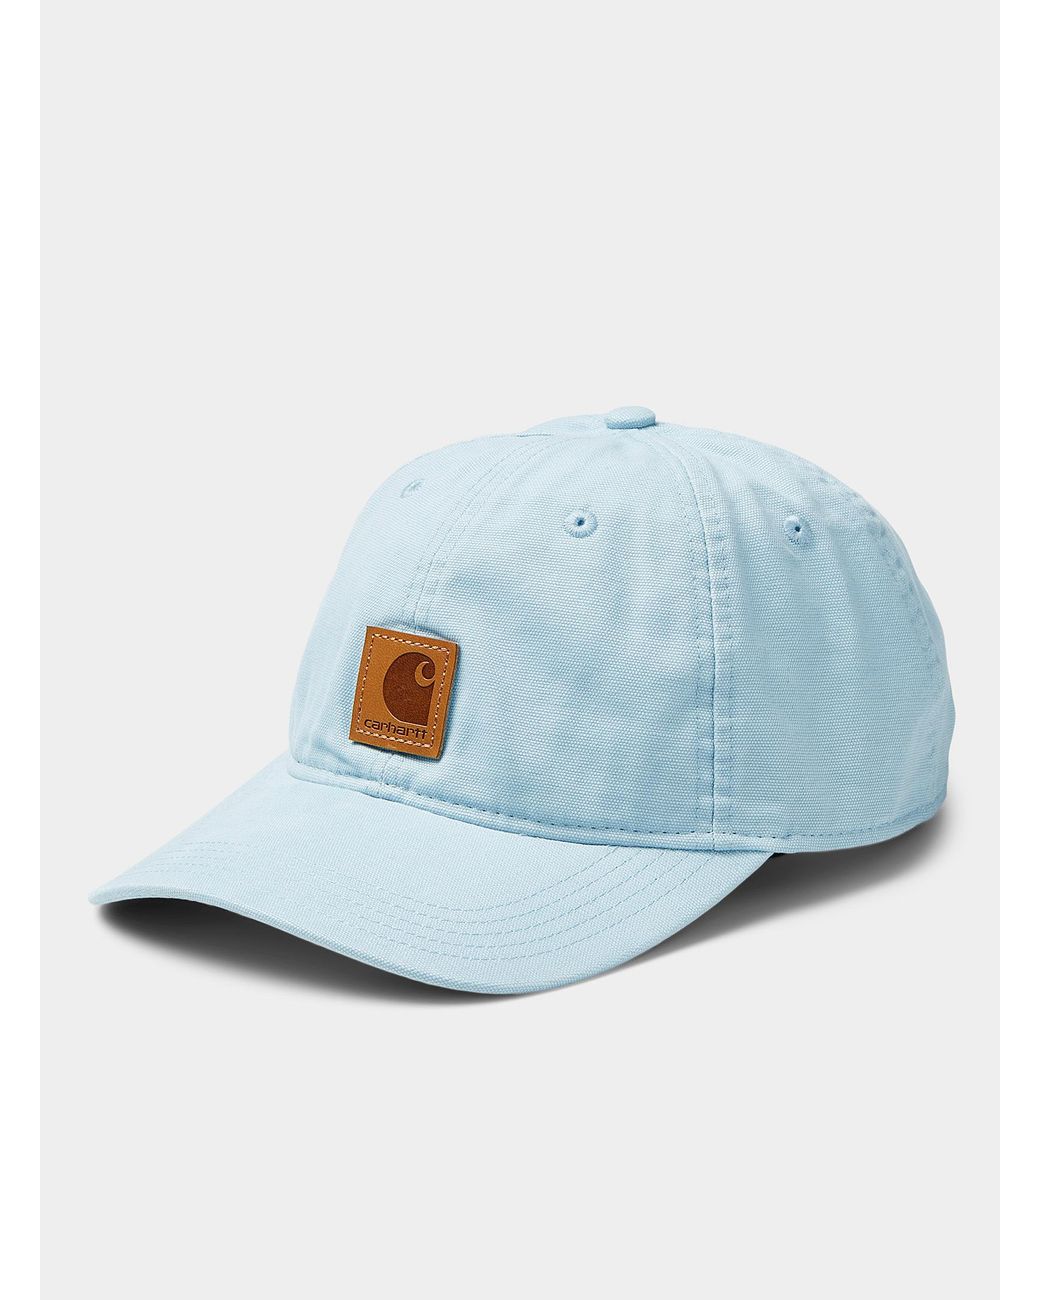 Carhartt Washed Cotton Baseball Cap in Blue | Lyst